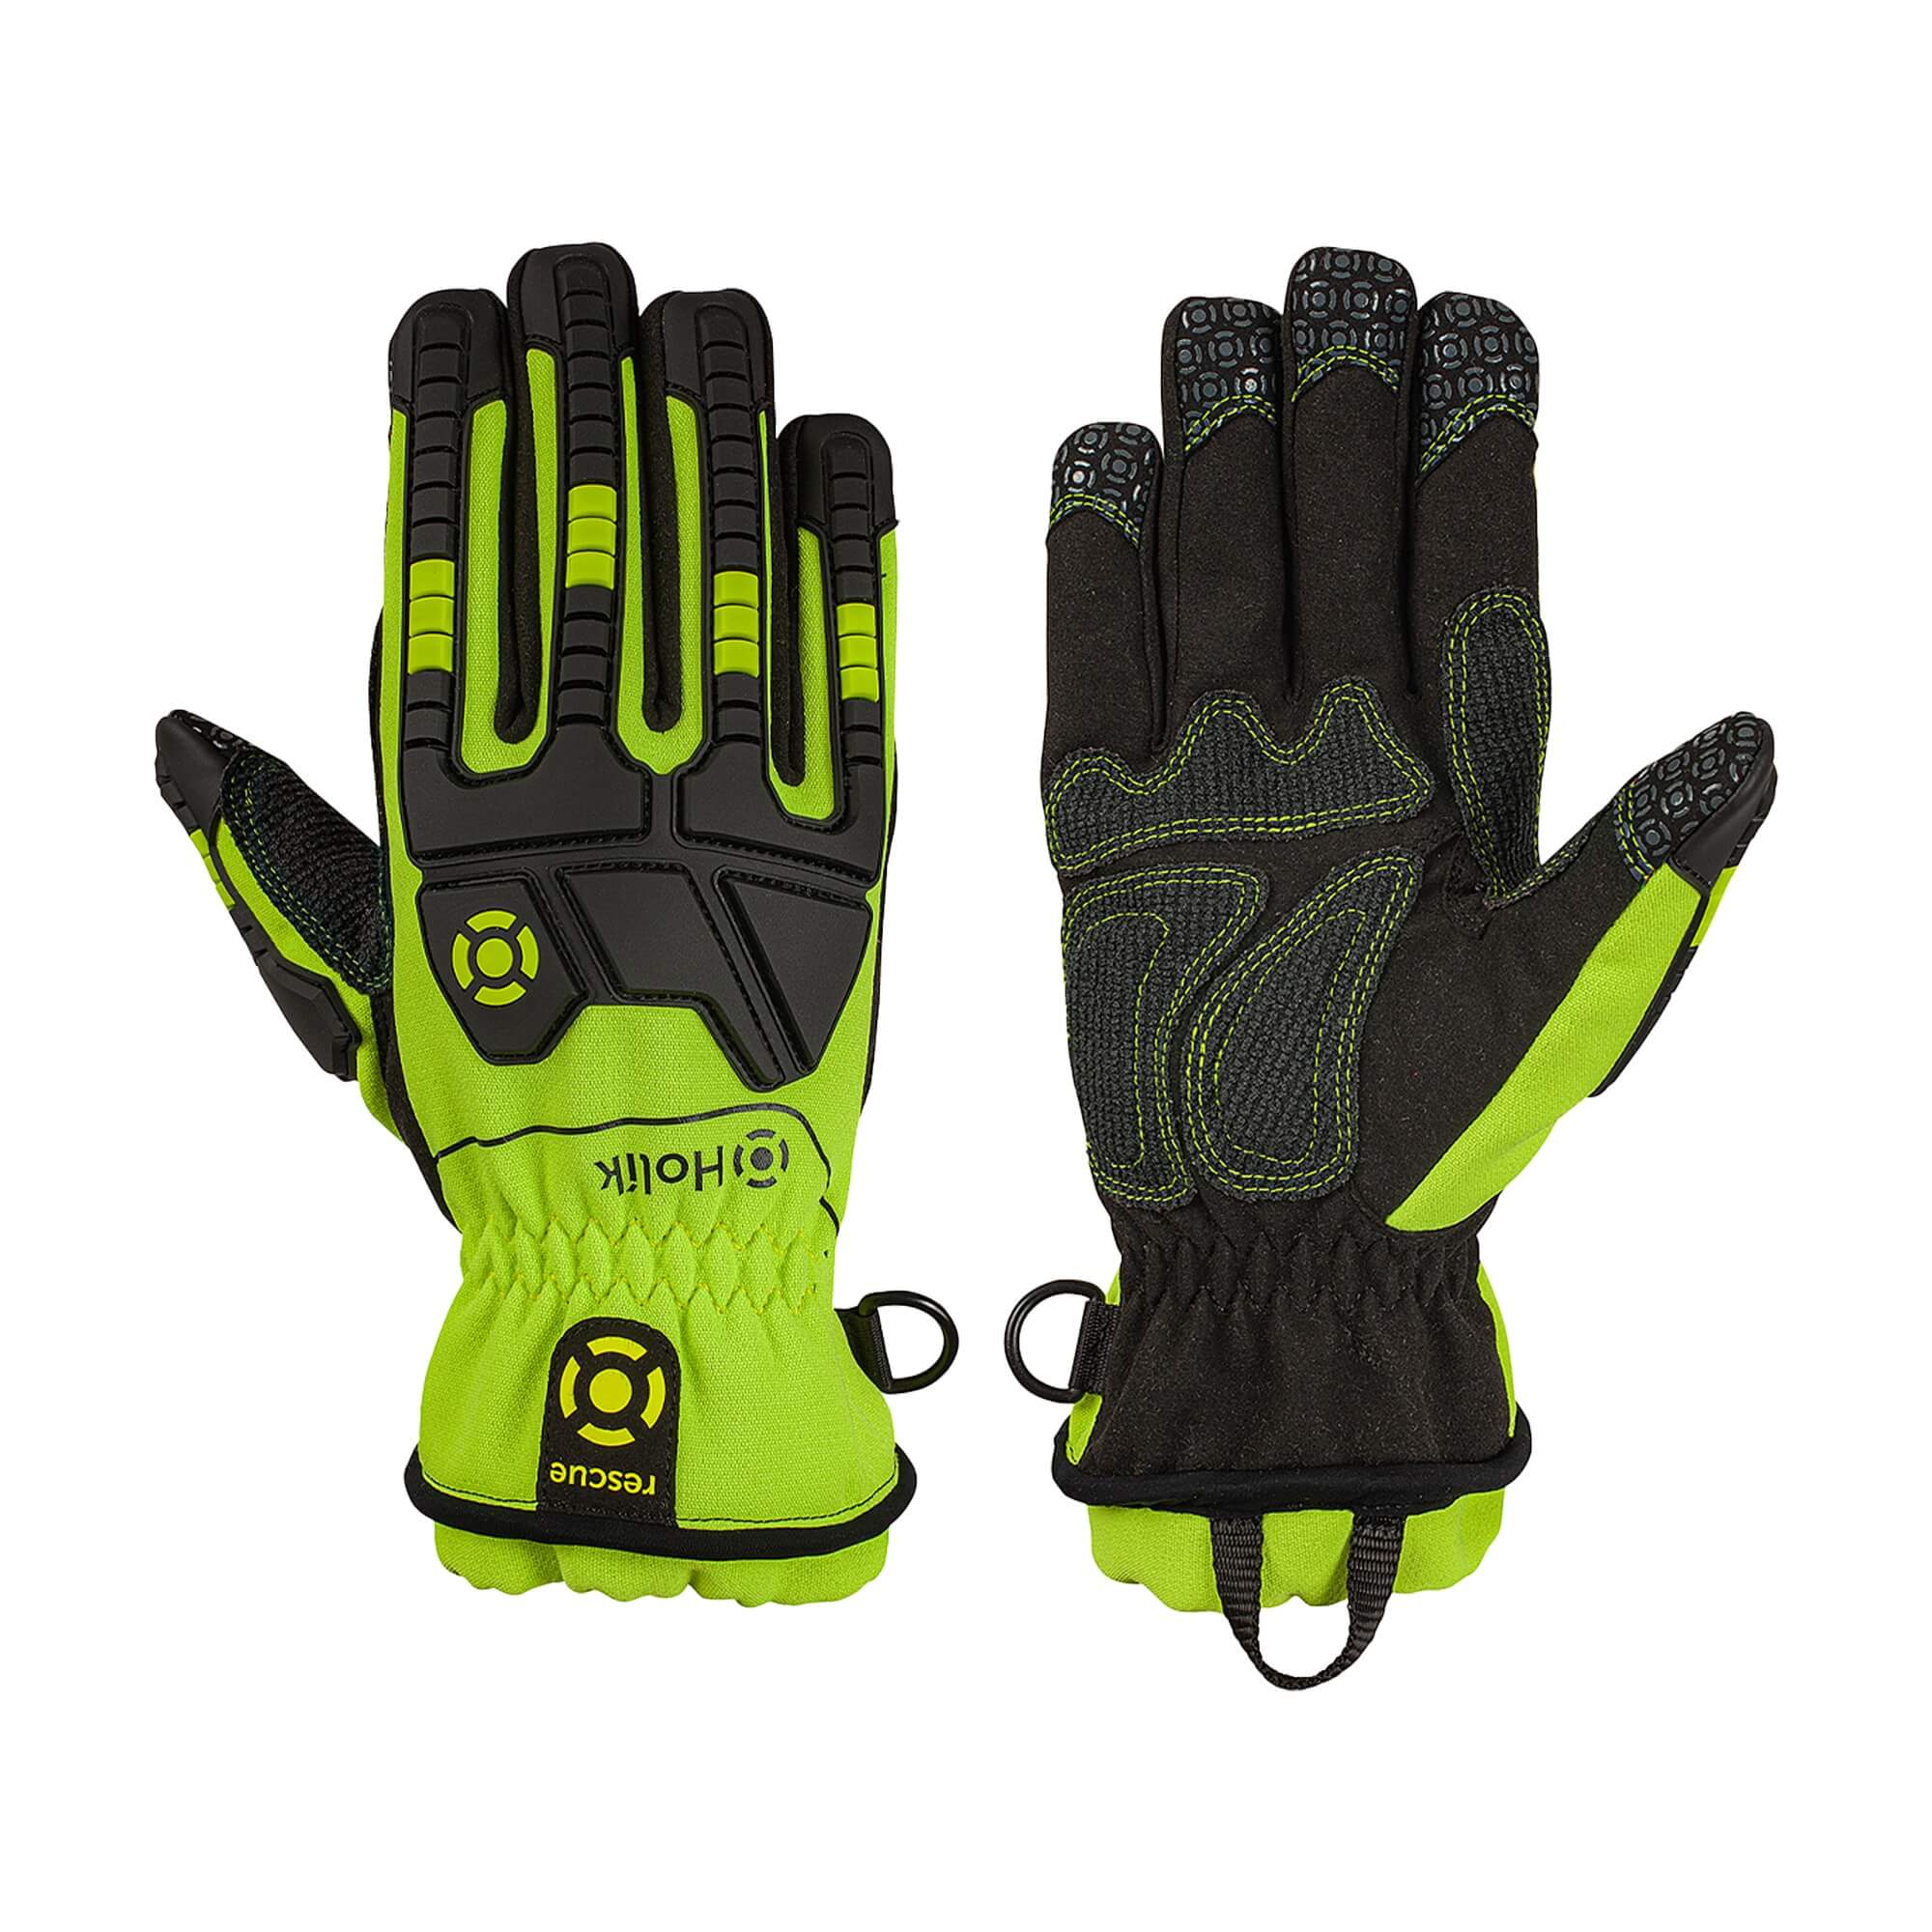 Emergency gloves for Firefighters and Rescuers Blaze Evo